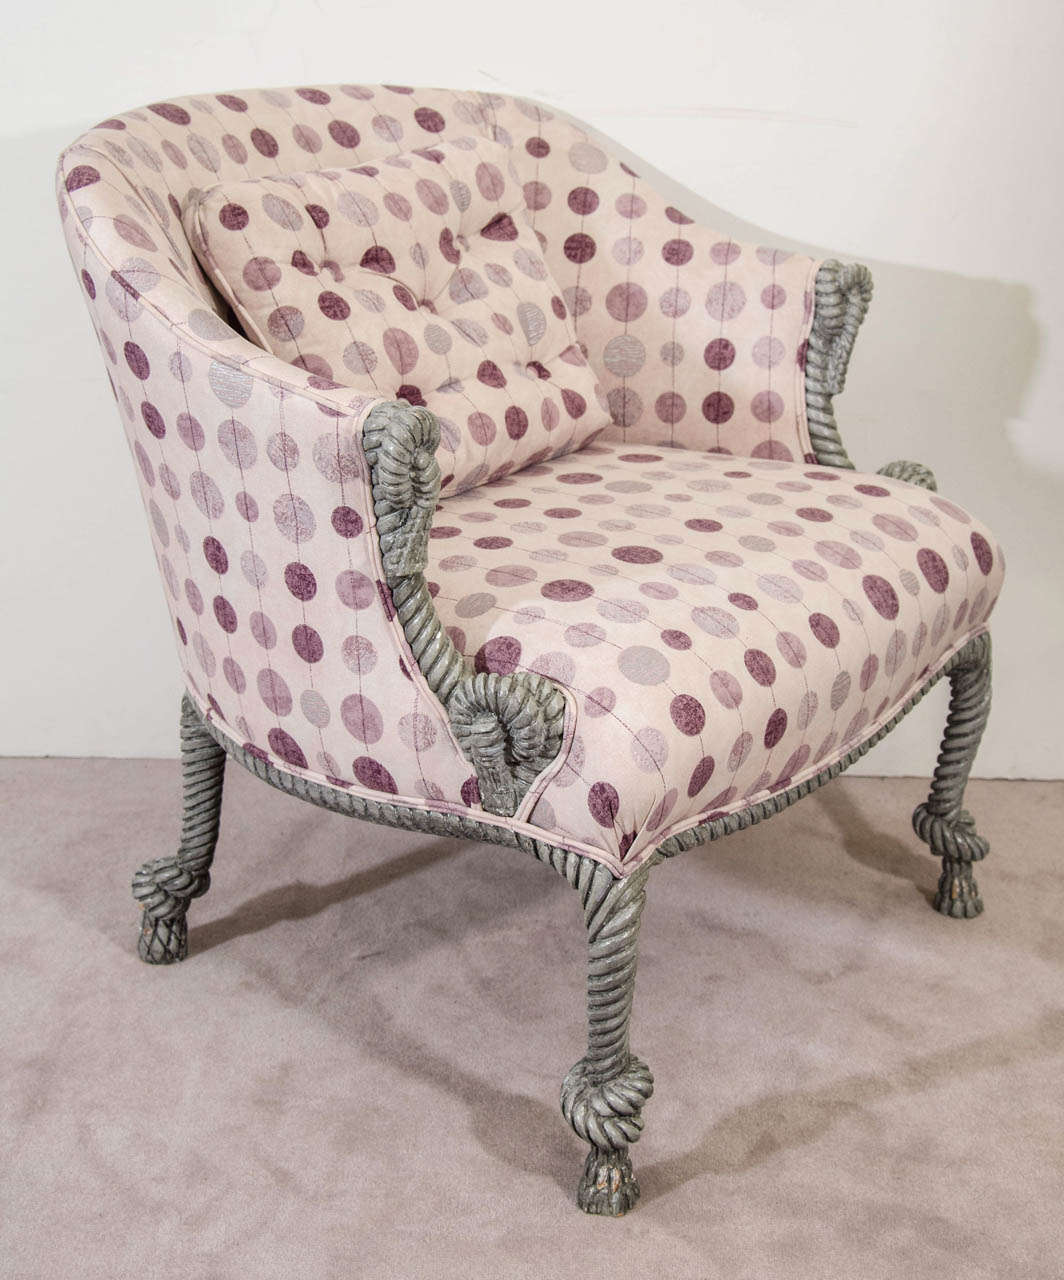 A pair of vintage Italian armchairs with purple hued polka dot upholstery, and painted wood frame carved with a tassel motif.

Good vintage condition with age appropriate wear.  Some loss to grey paint.